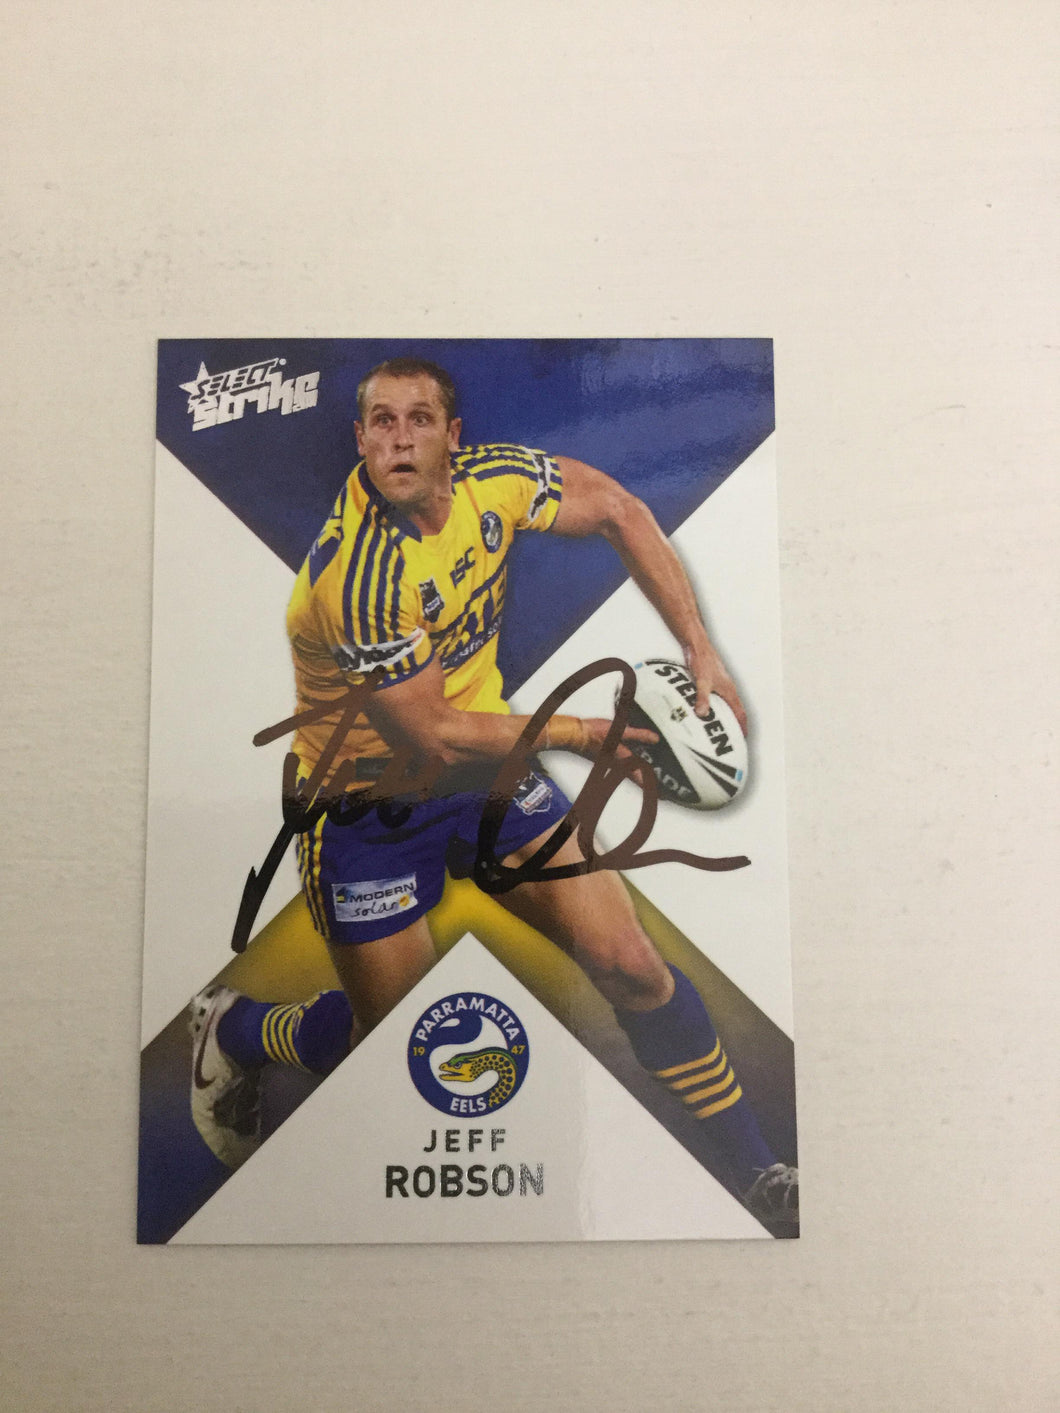 2011 Select Strike Jeff Robson Parramatta Eels Personally Signed Card